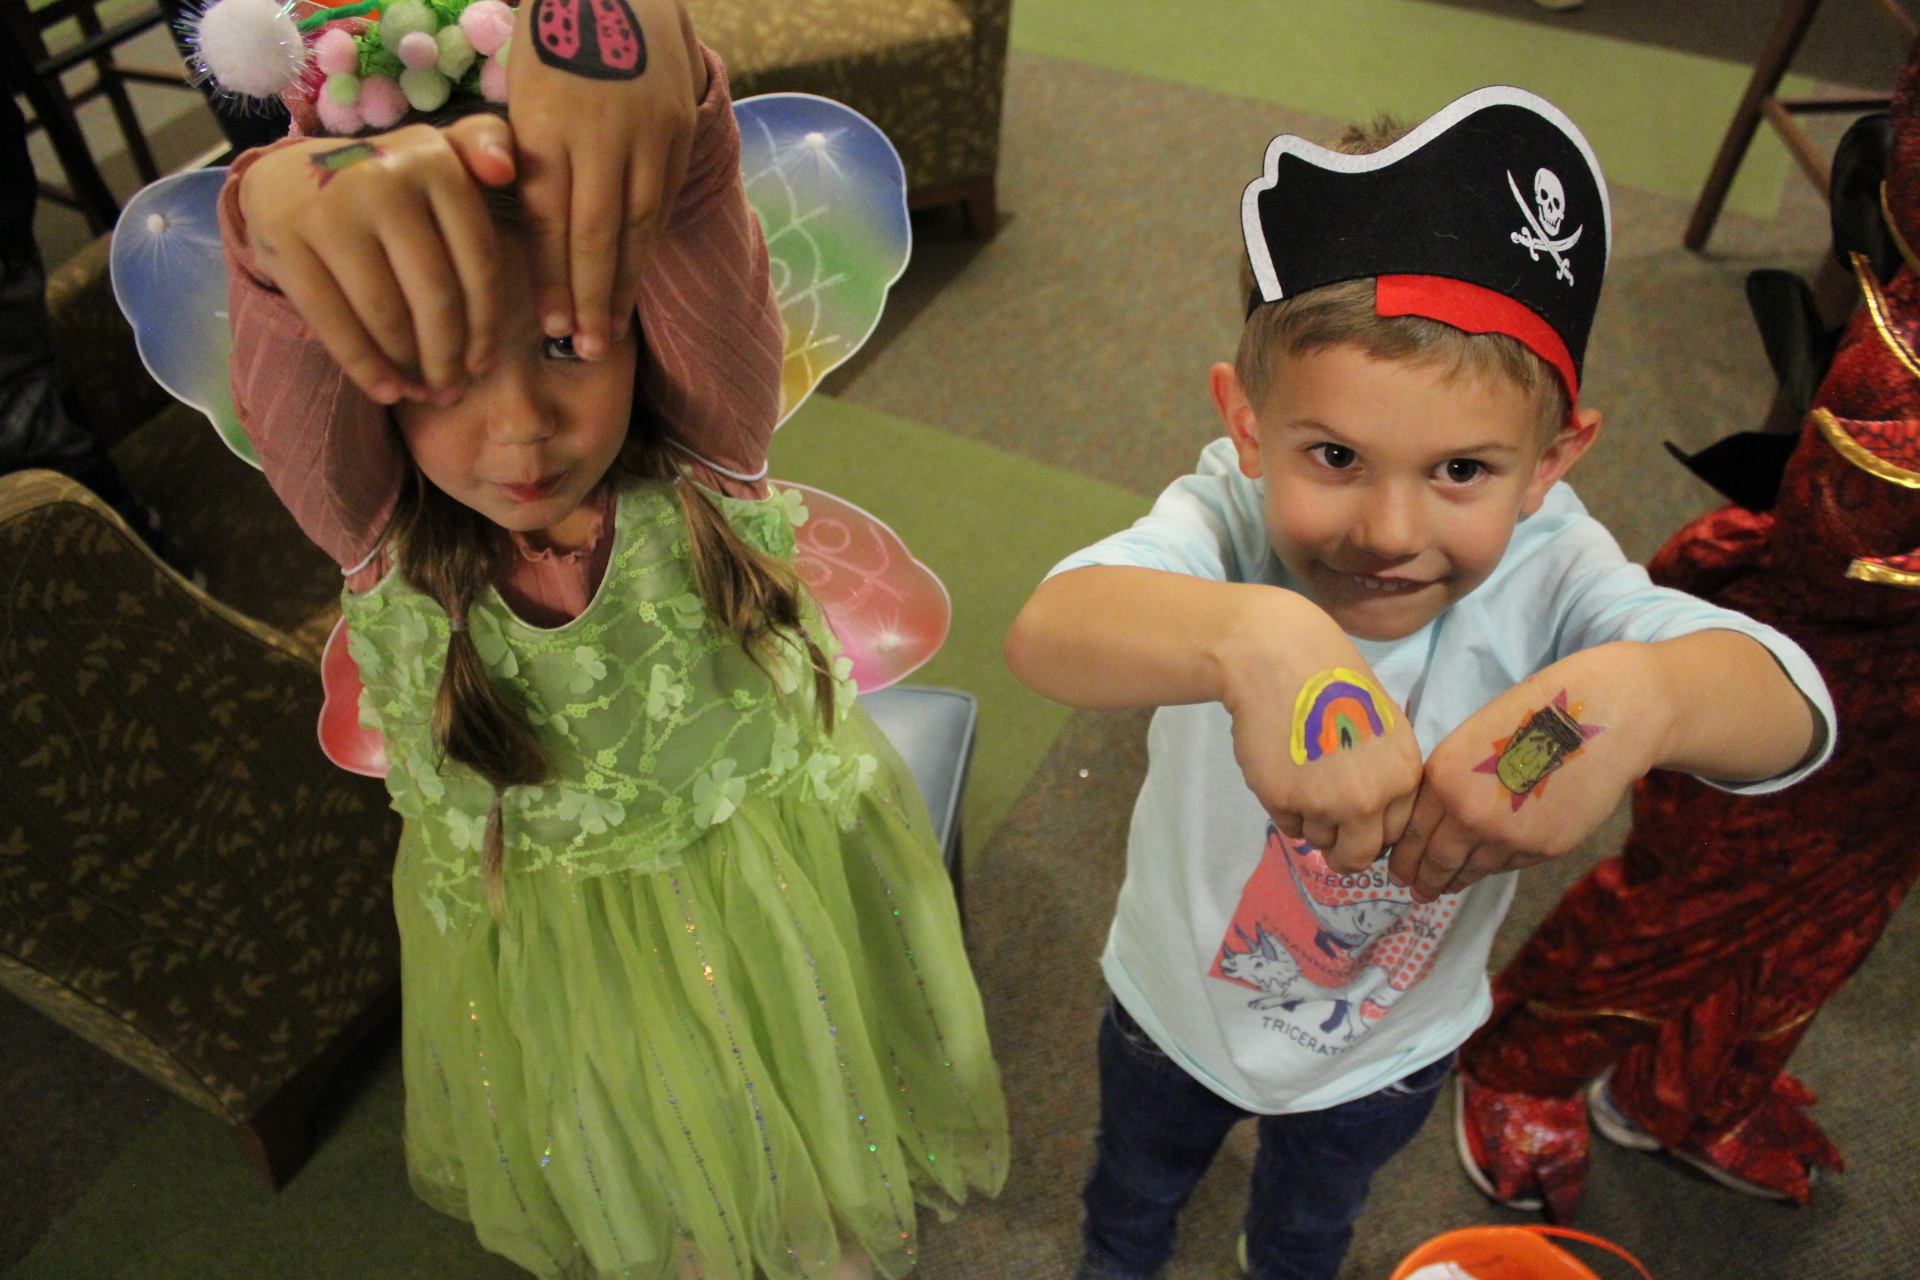 Children in costumes showing off temporary tattoos